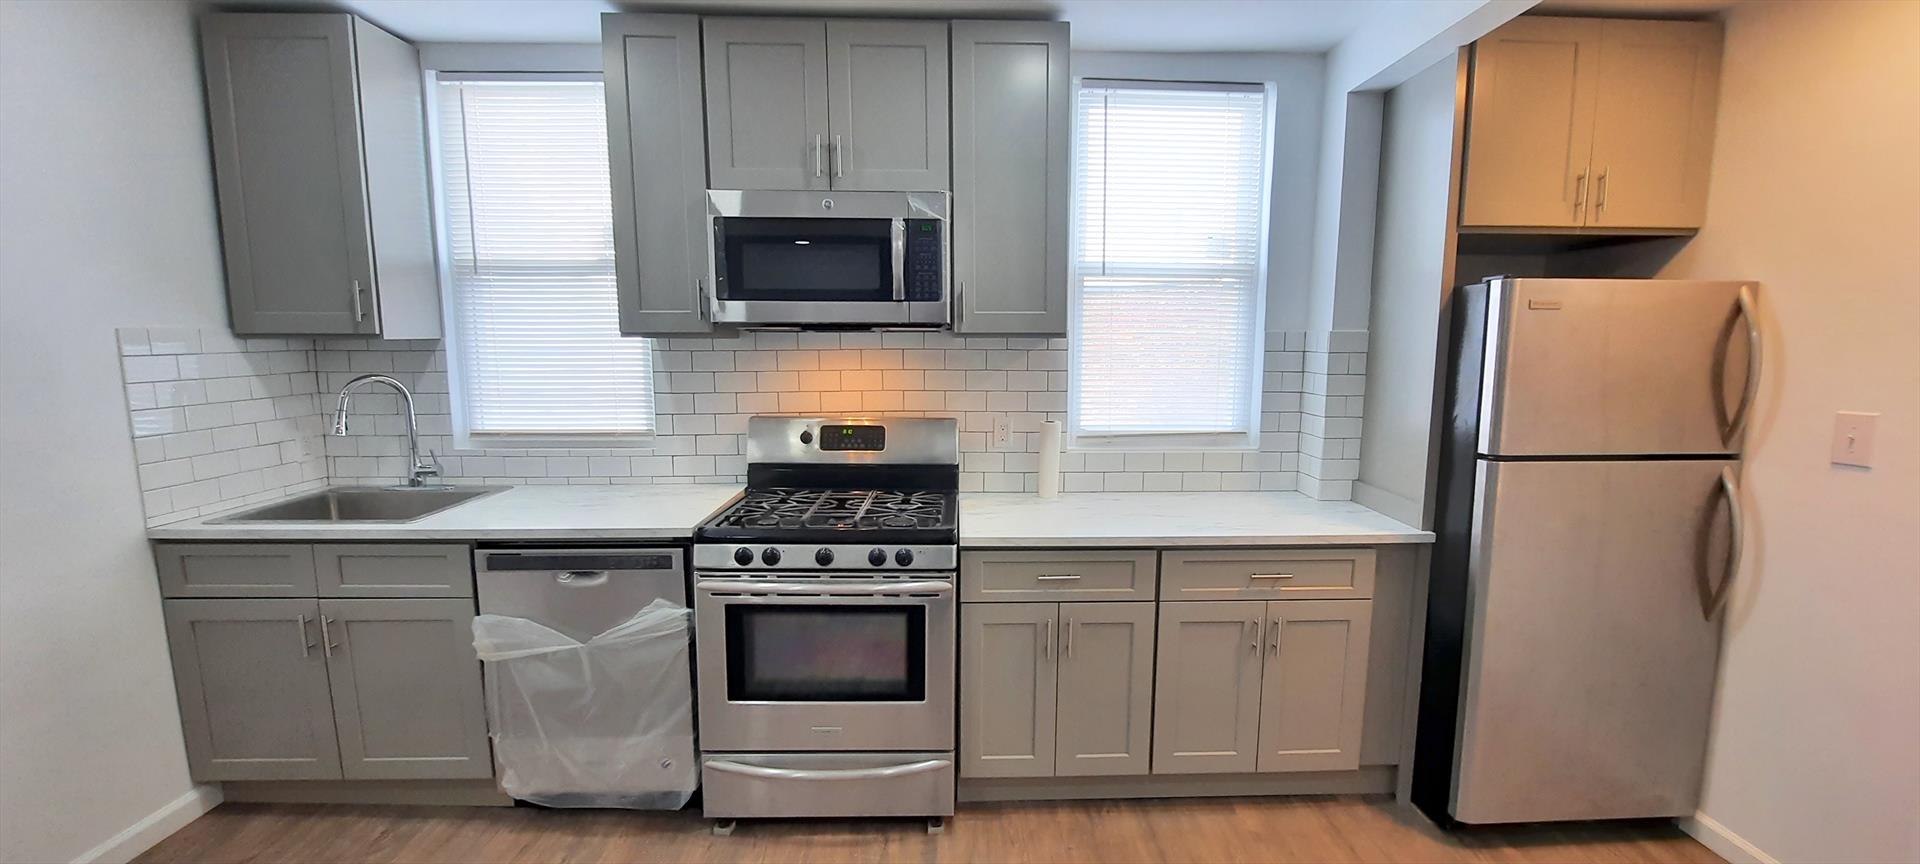 Move into this recently renovated Union City 2 BR rental conveniently located in the Bergenline Avenue business district. Features: great natural light (6 windows), open modern kitchen with stainless steel refrigerator, gas stove, microwave, and dishwasher, living room (12.3' x 9'), 2 separate bedrooms (BR 1: 12.3 x 9.3' and BR 2:13' x 9'), ample closets, full bathroom with bathtub, wood laminate floors, recessed lighting, top floor of a 3rd floor walk up, close to shopping, restaurants, parks, and public transportation to NYC and the Journal Square Path. Water and sewer are included. The tenant pays for heat, hot water, gas, and electricity. AVAILABLE May 15th. To make this great apartment yours: $1850 (first months rent), $2775 (security deposit), $1850 (broker fee), $65 credit check per adult tenant. Tenants must have great credit and verifiable income.  Call Victor Alicea (Liberty Realty) at 917-617-9906 (m) or 201-610-1010 ext. 321 (o), to schedule an appointment.  